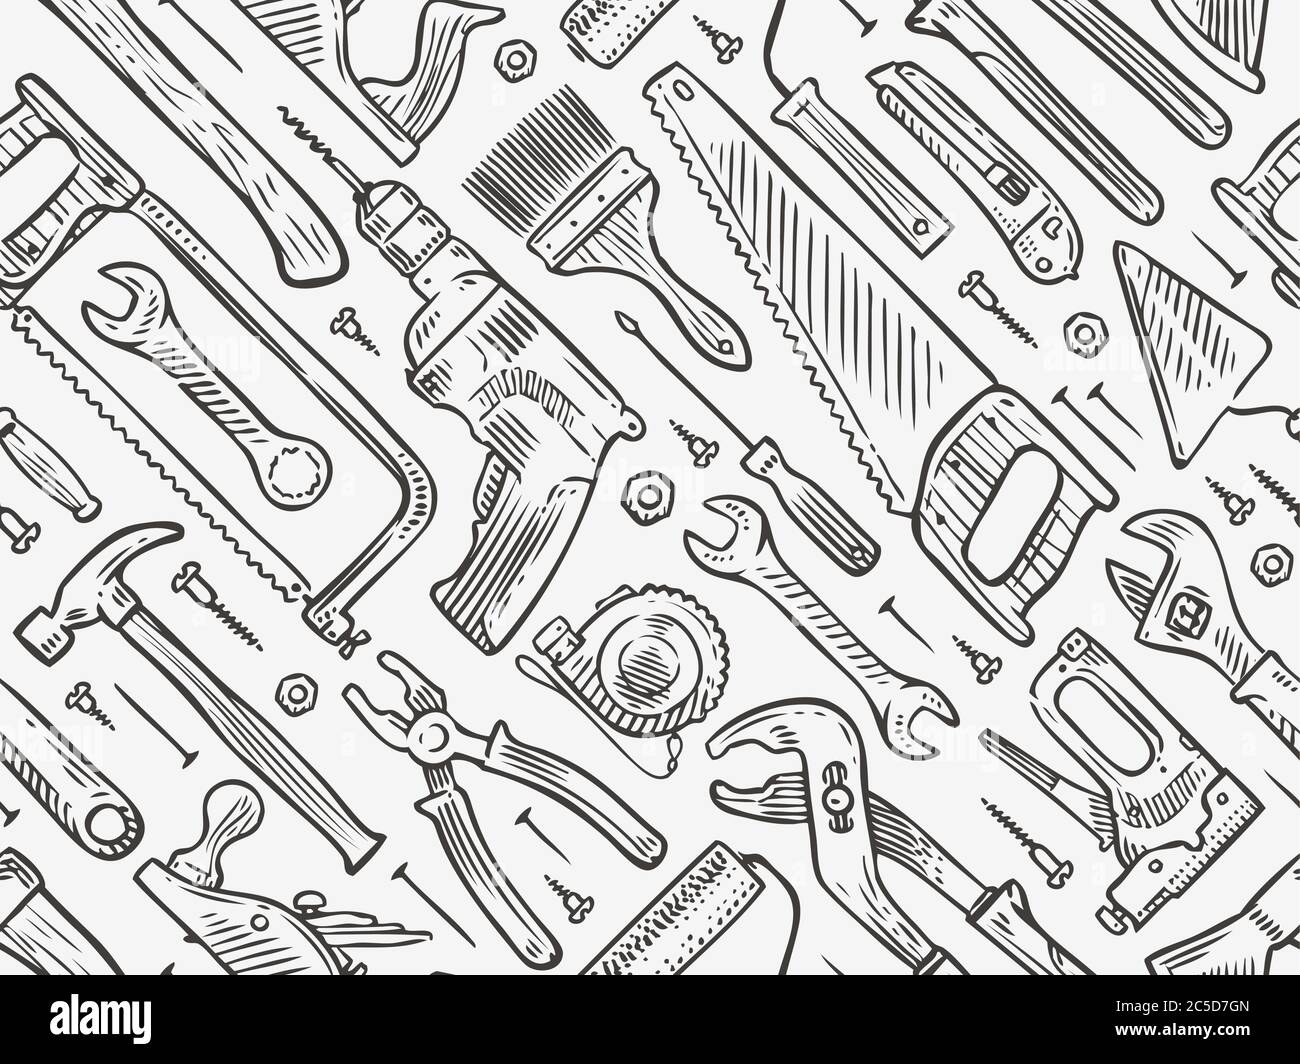 Construction tools seamless background. Repair vector illustration Stock Vector